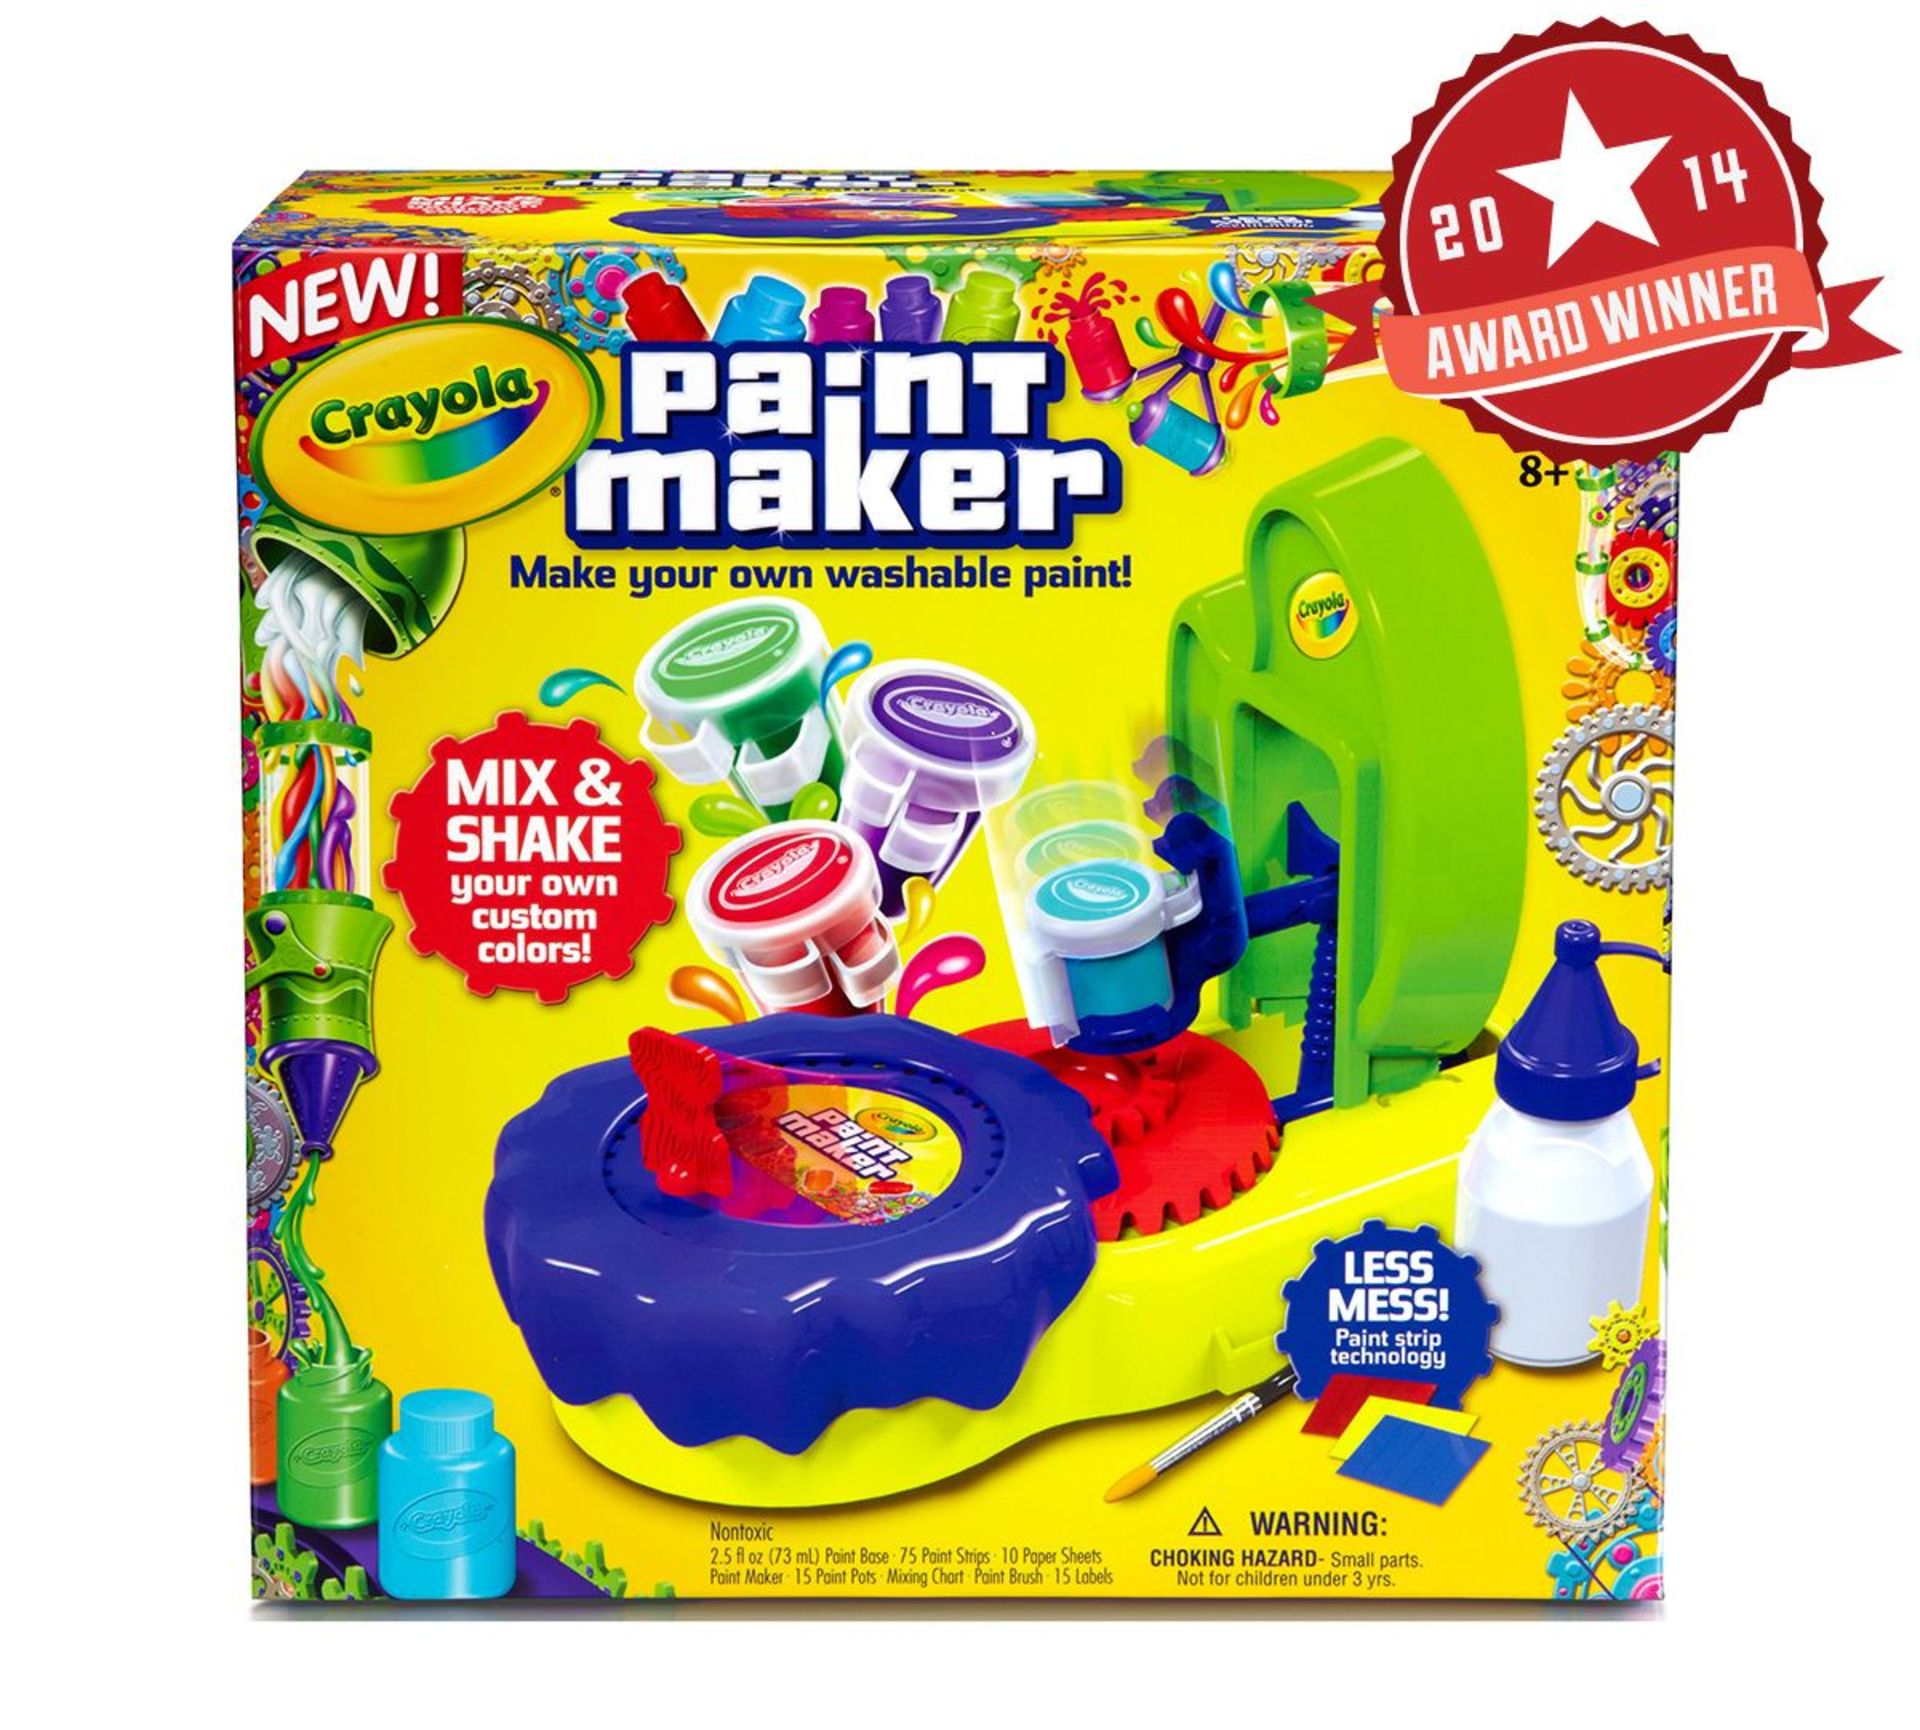 V *TRADE QTY* Brand New Crayola Paint Maker Kit for Washable Paint X 6 YOUR BID PRICE TO BE